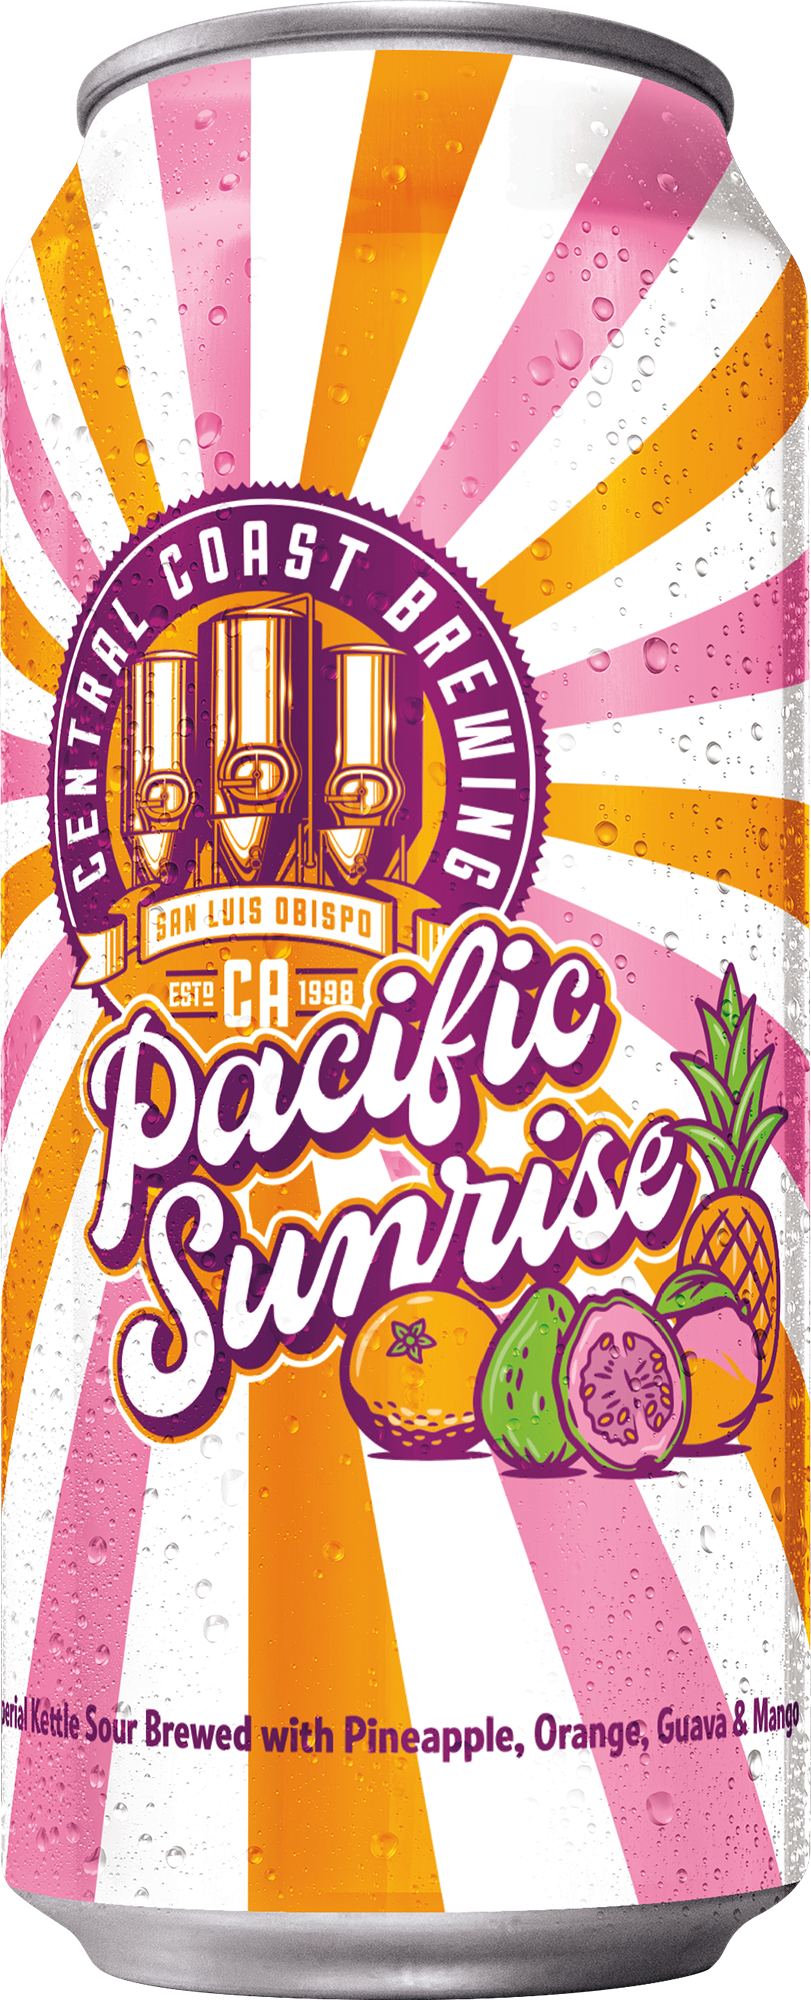 Pacific Sunrise 12-Pack Cans (12-16 oz)